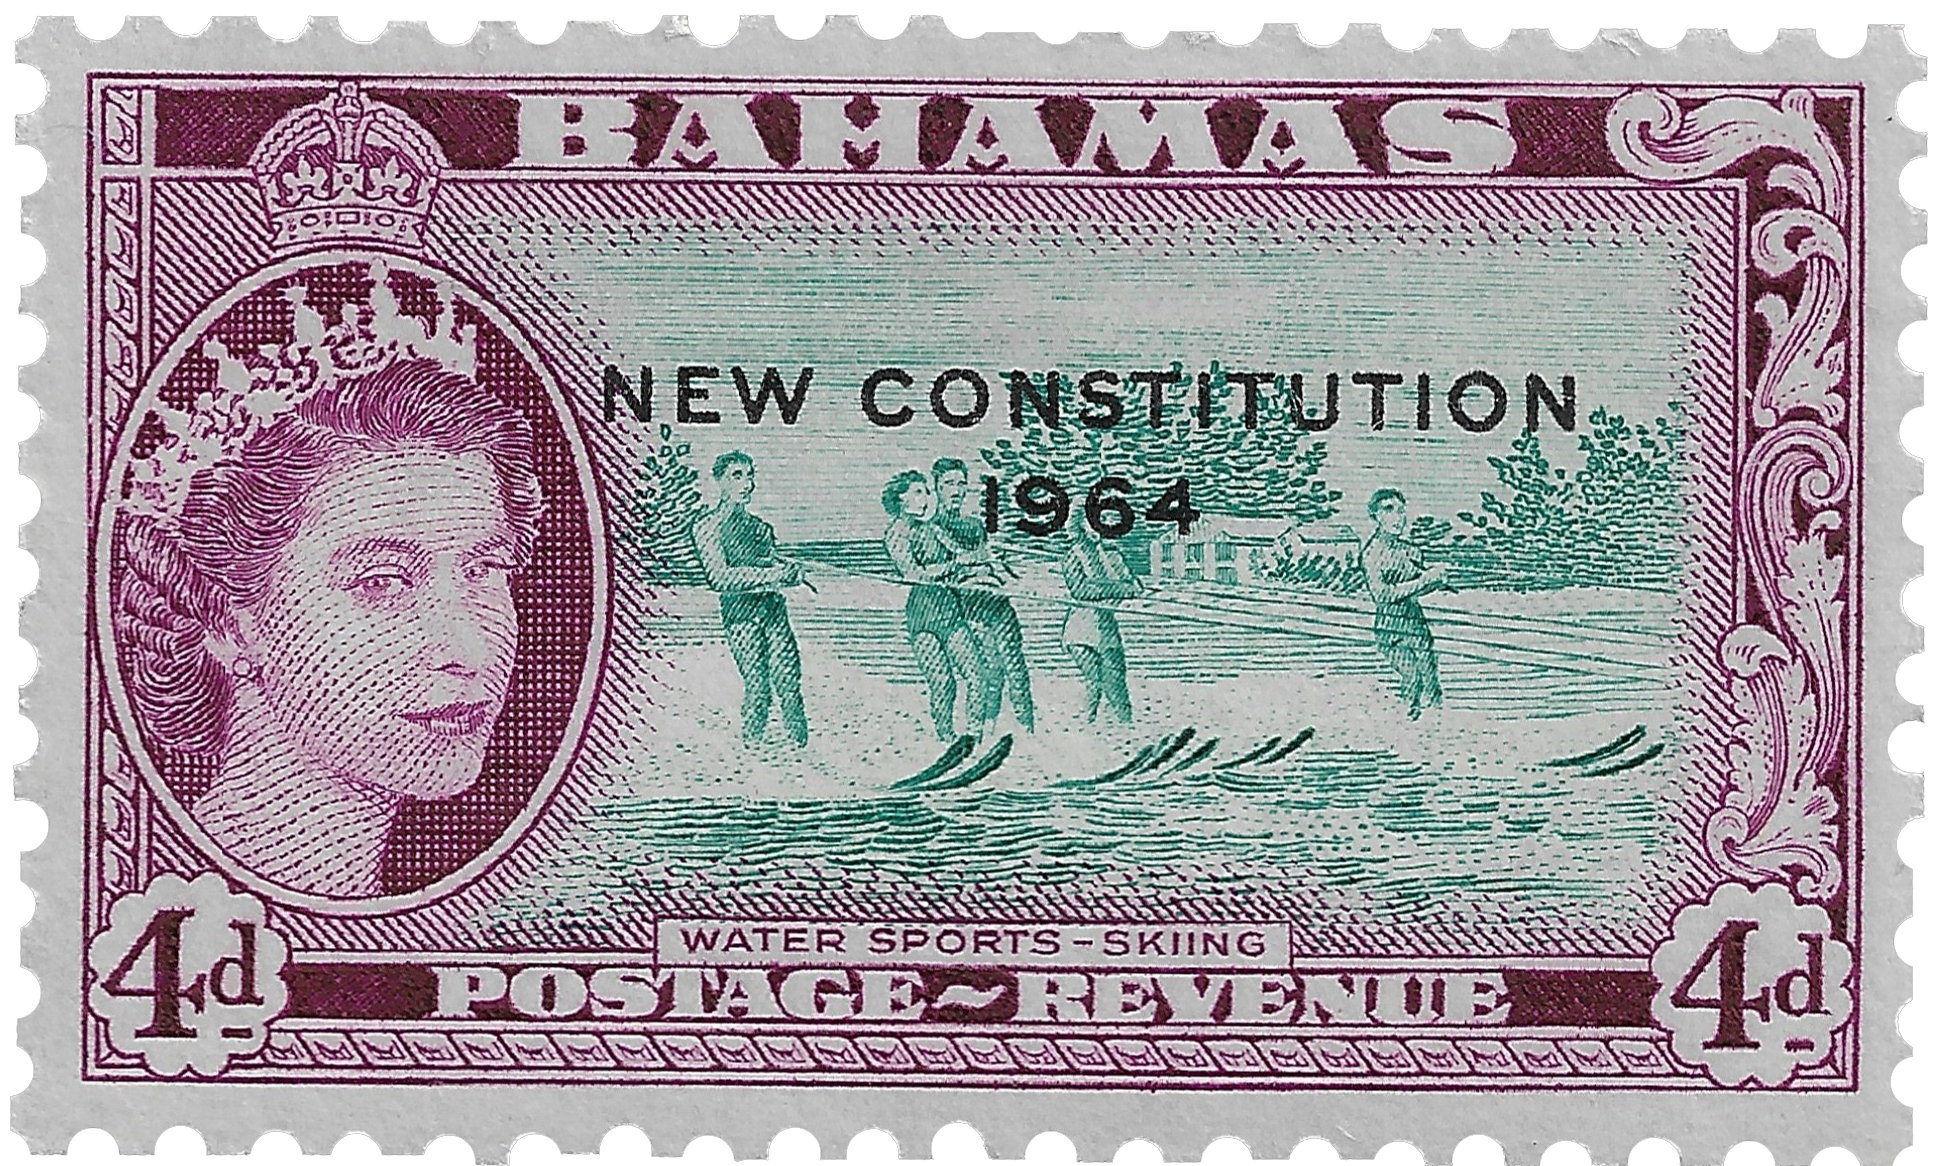 4d 1964, Water Sports, Skiing, New Constitution